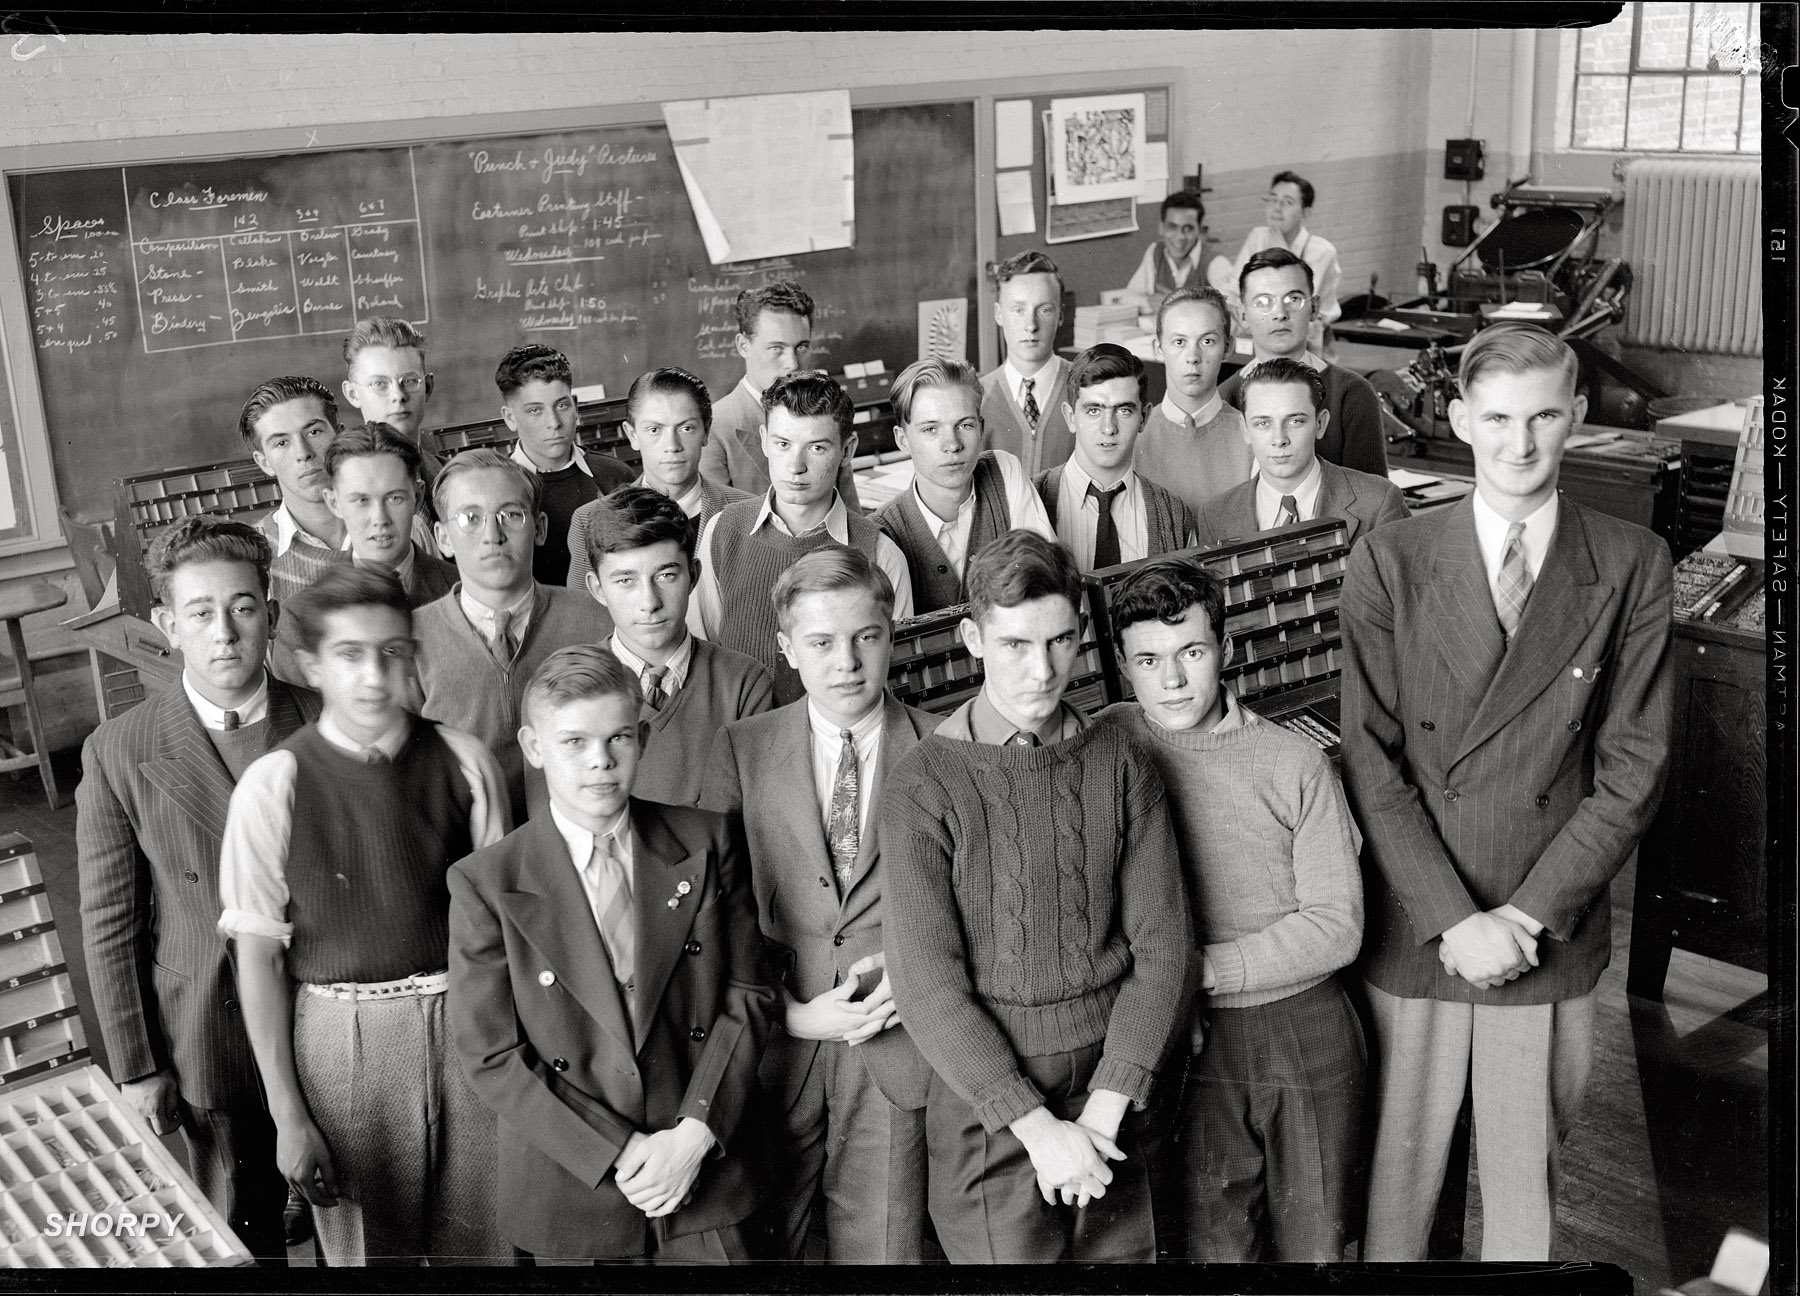 Washington, D.C. "Students, Eastern High School, 1941." Notes on the chalkboard mention both the school's newspaper, the Easterner, and its yearbook, "Punch and Judy." National Photo Company Collection safety film negative. View full size.